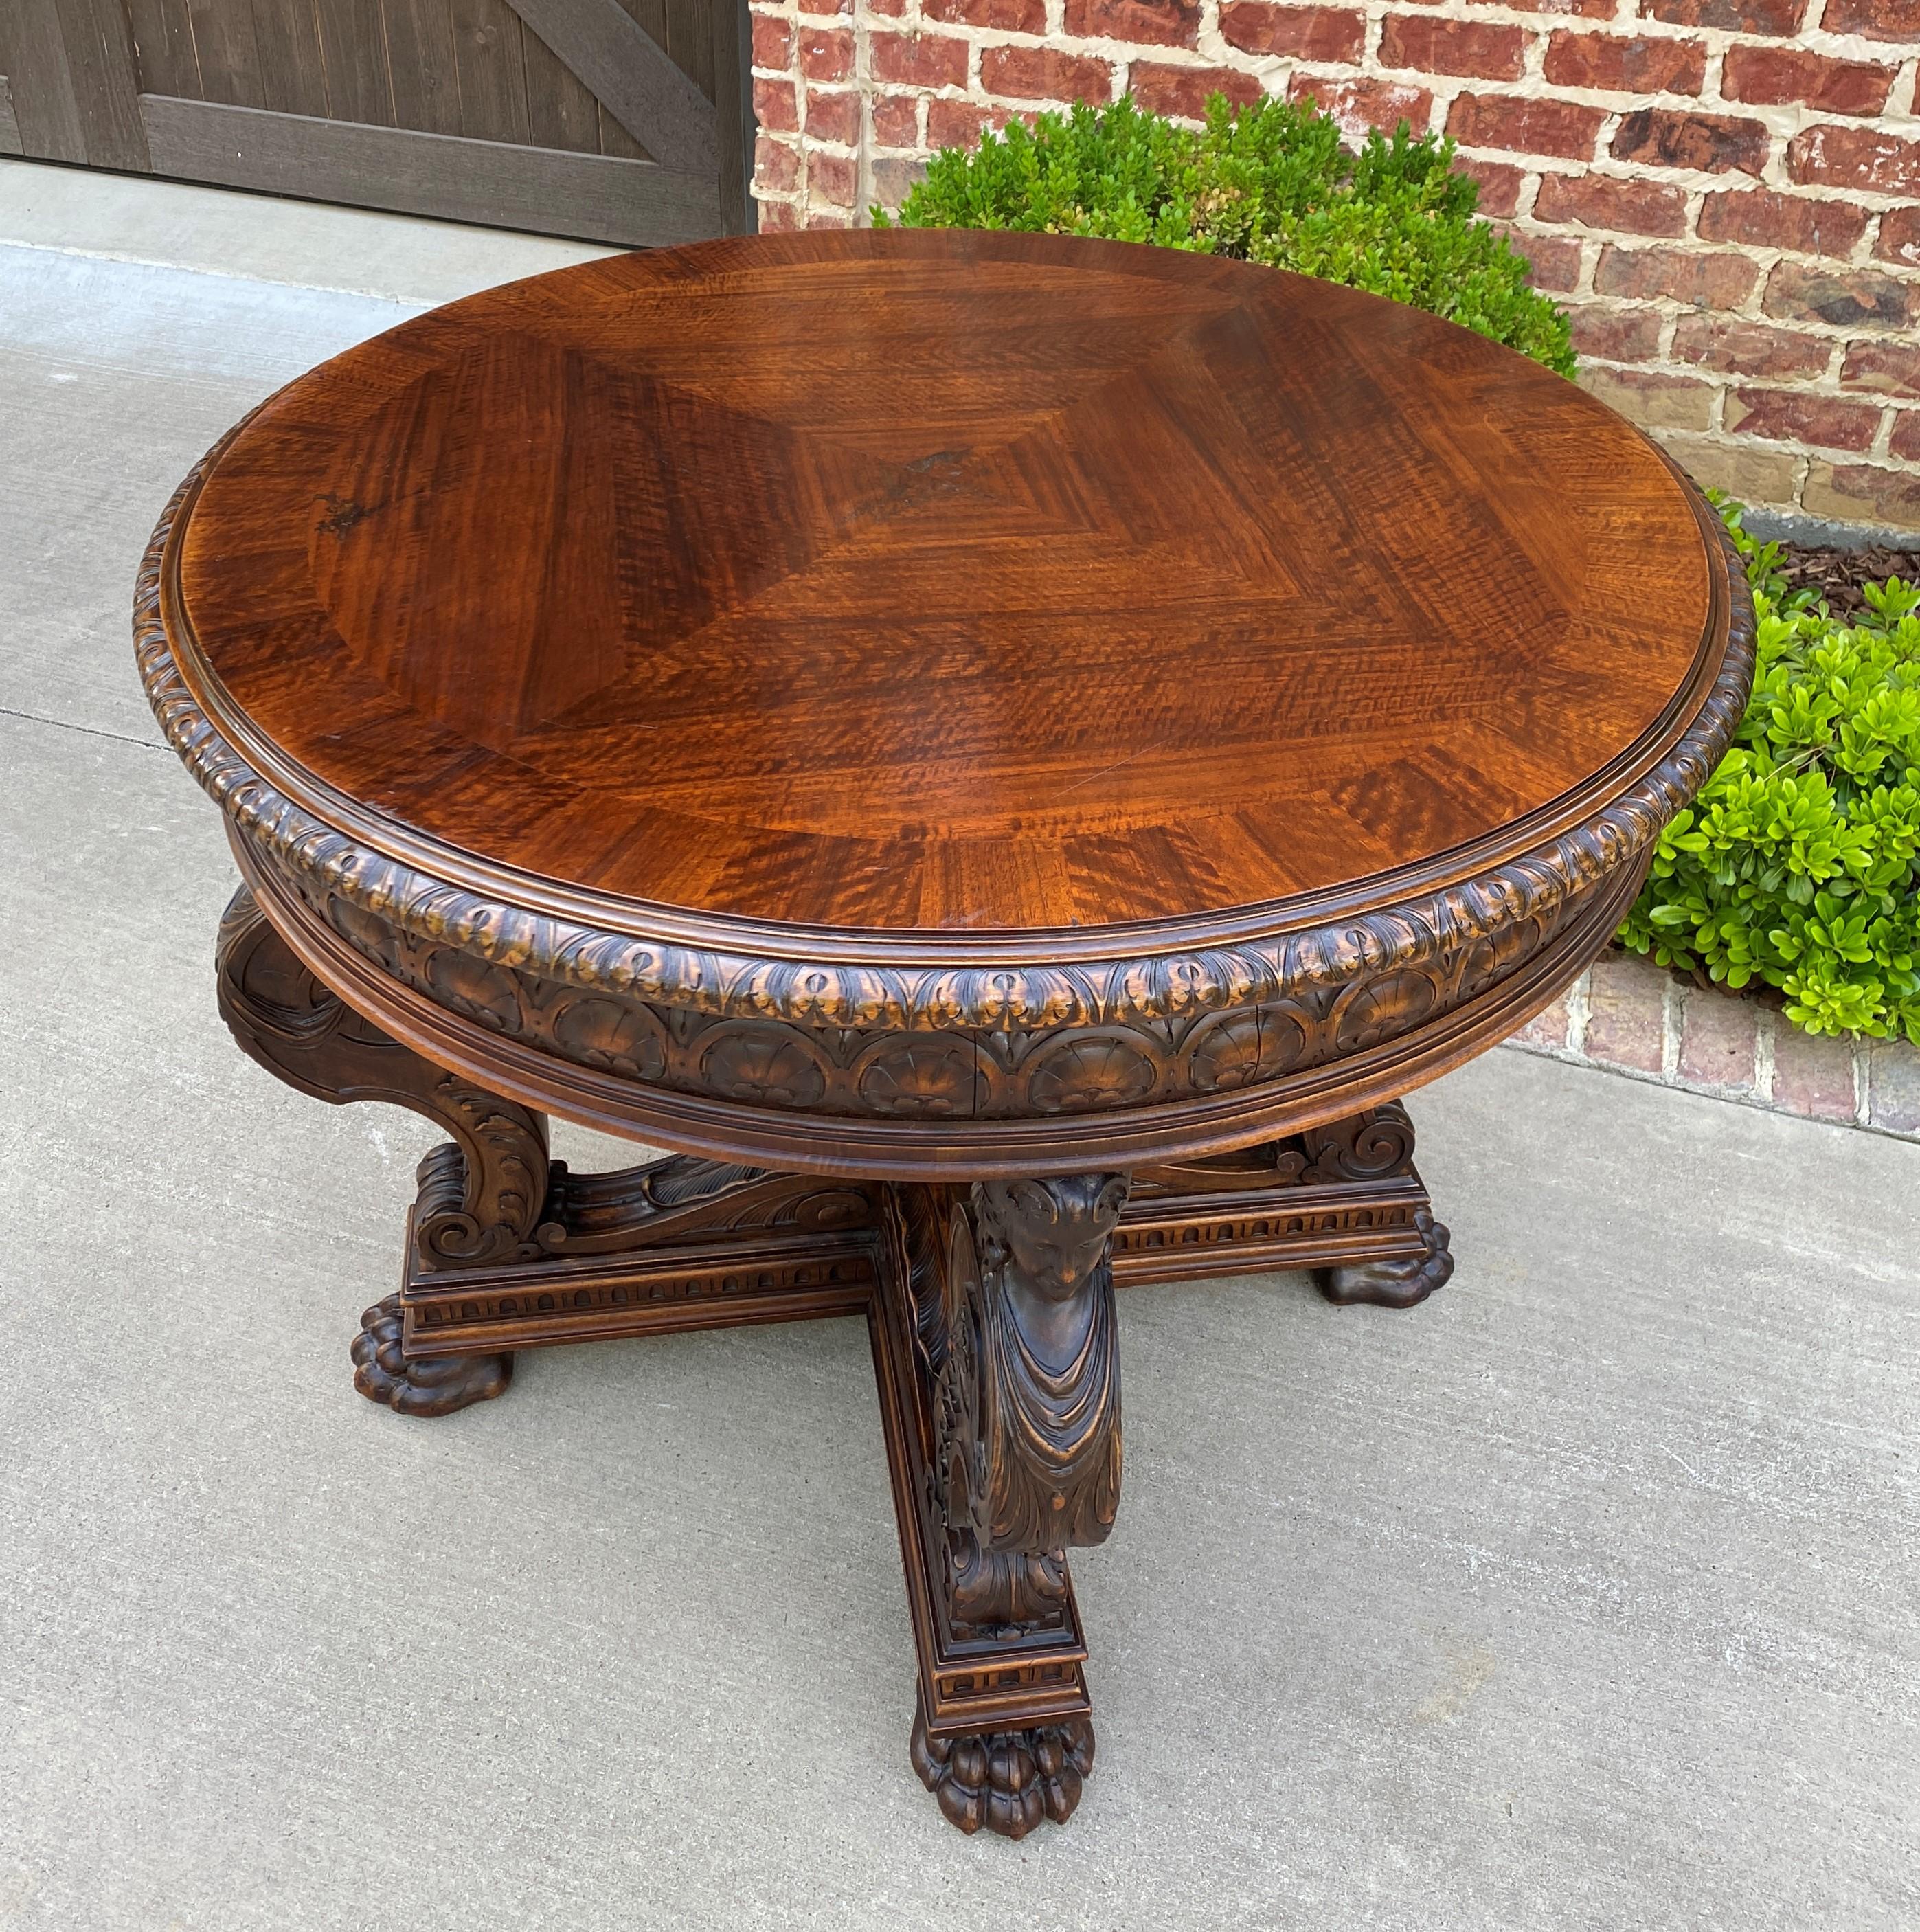 Walnut Antique French Round Table Entry Center Parlor Table Renaissance Revival 19th C